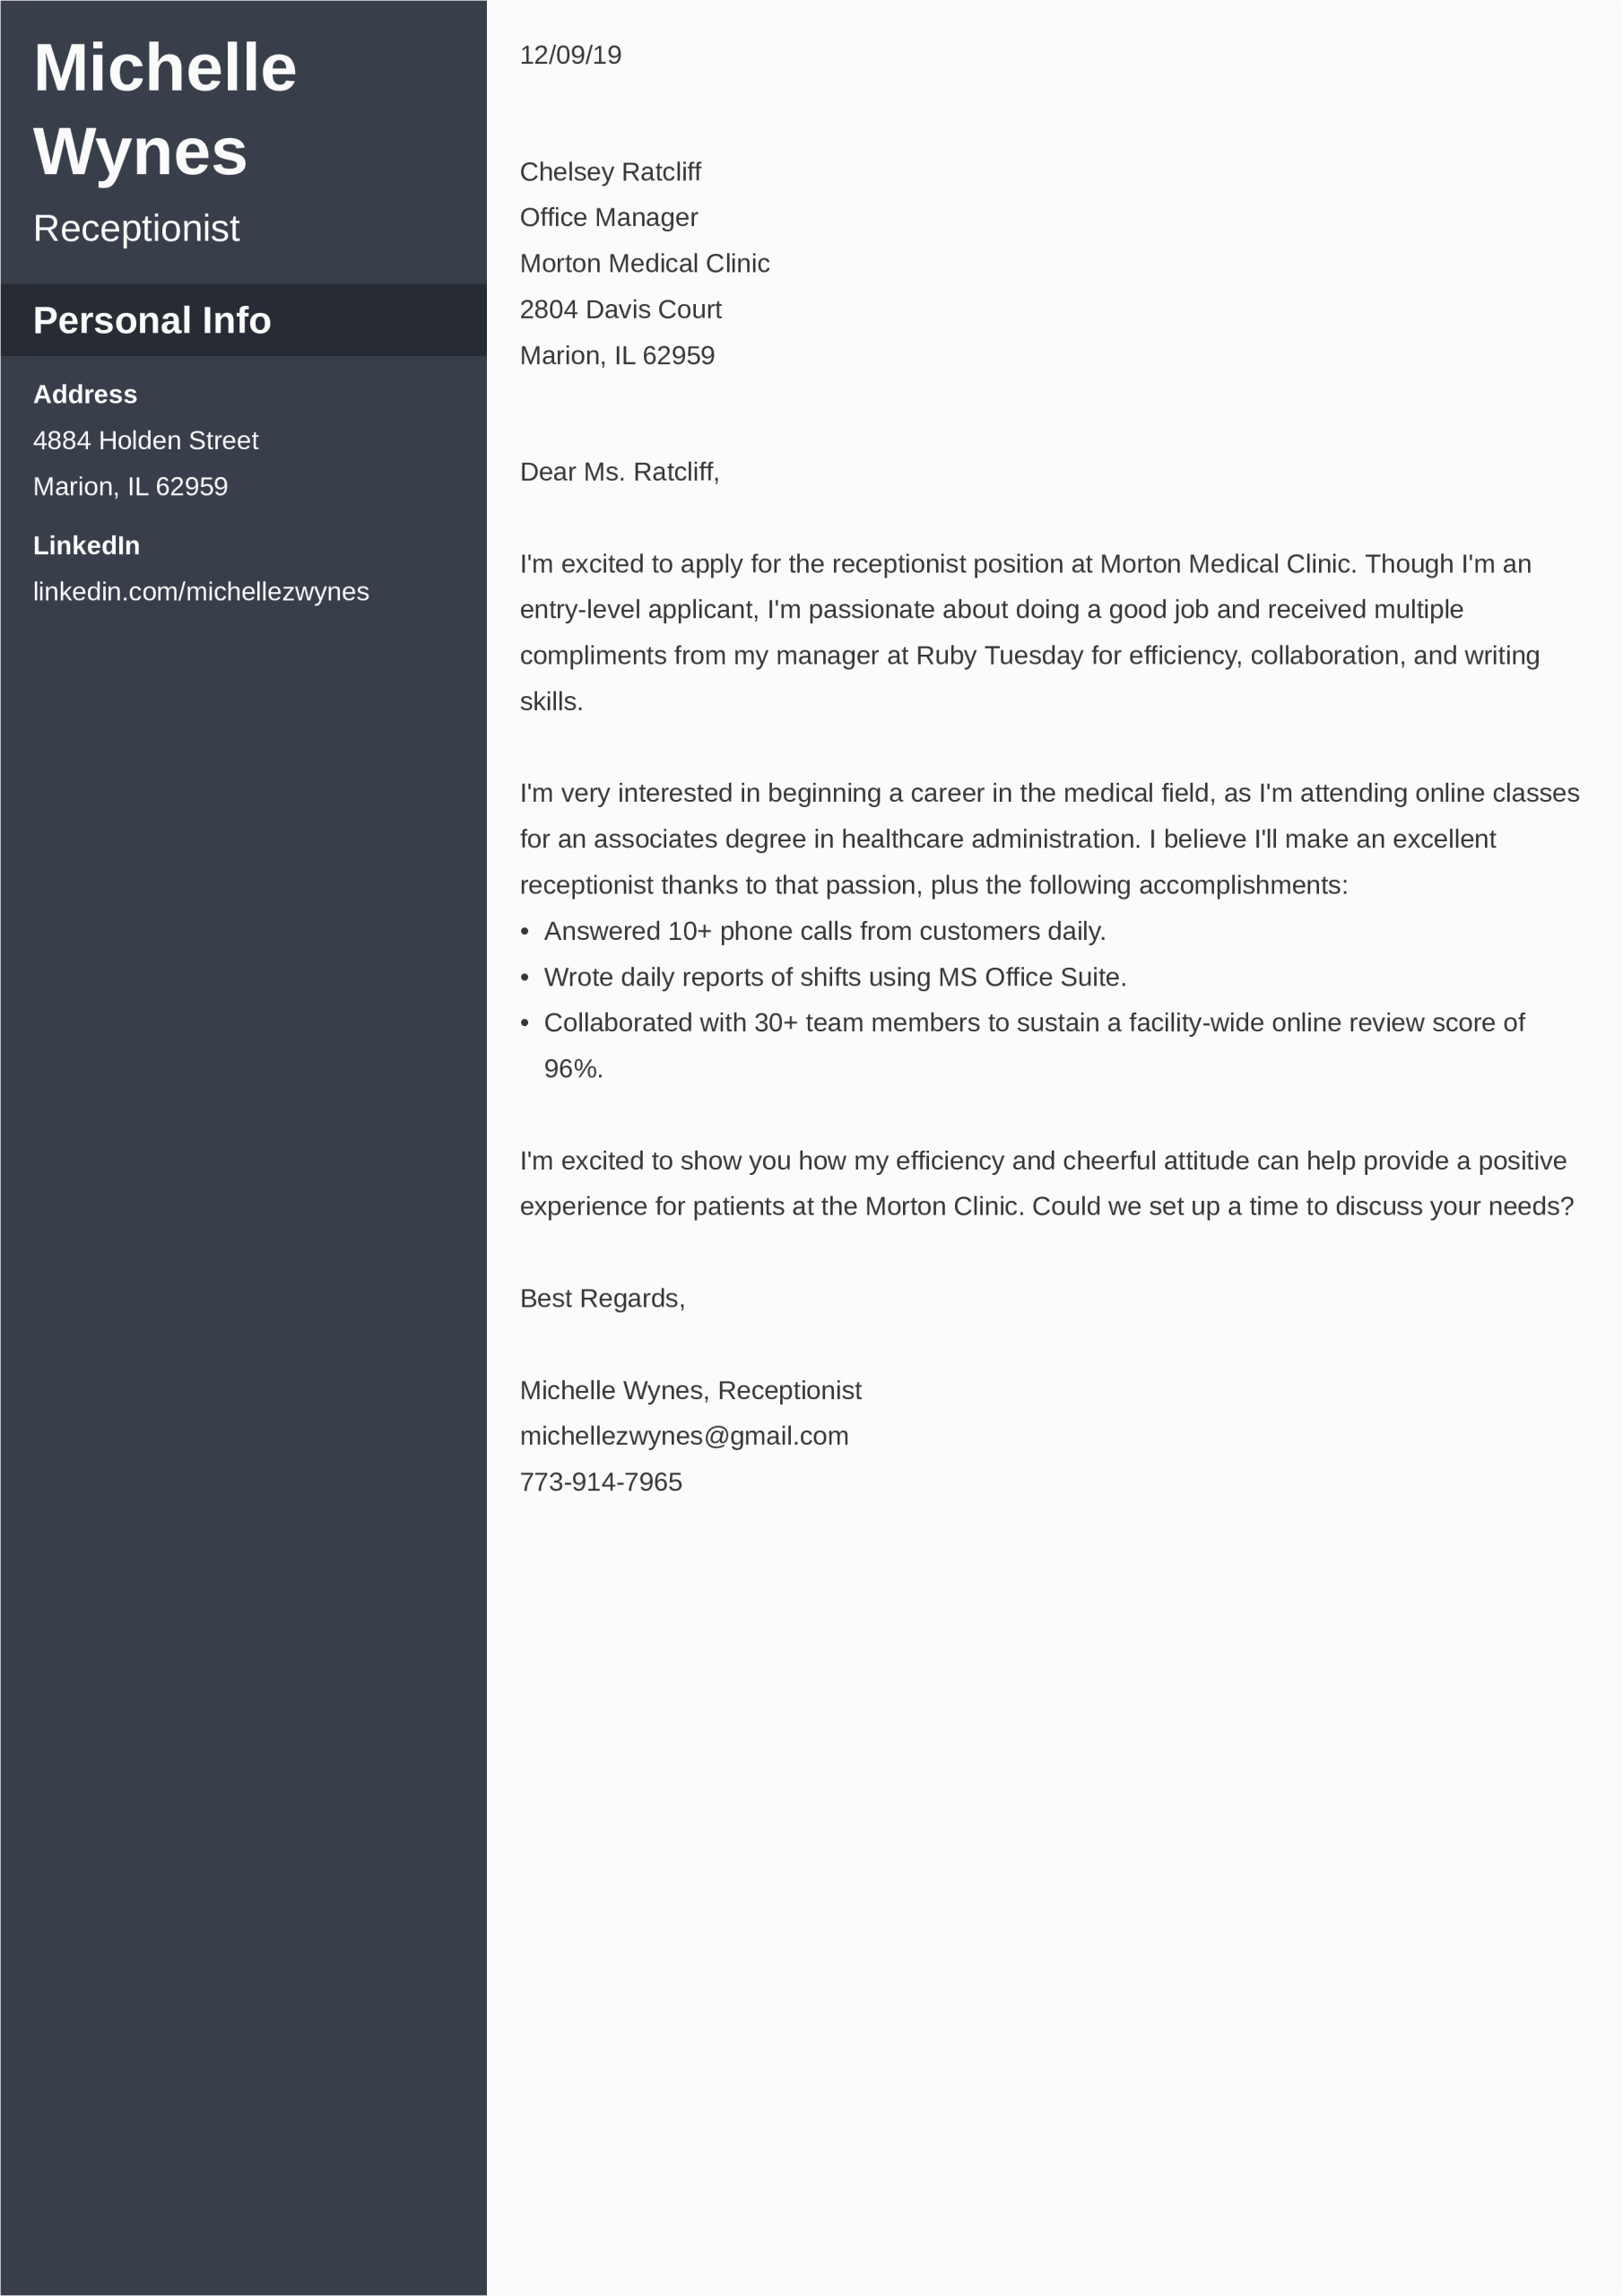 Sample Of Cover Letter for Resume without Experience How to Write A Cover Letter with No Experience—examples